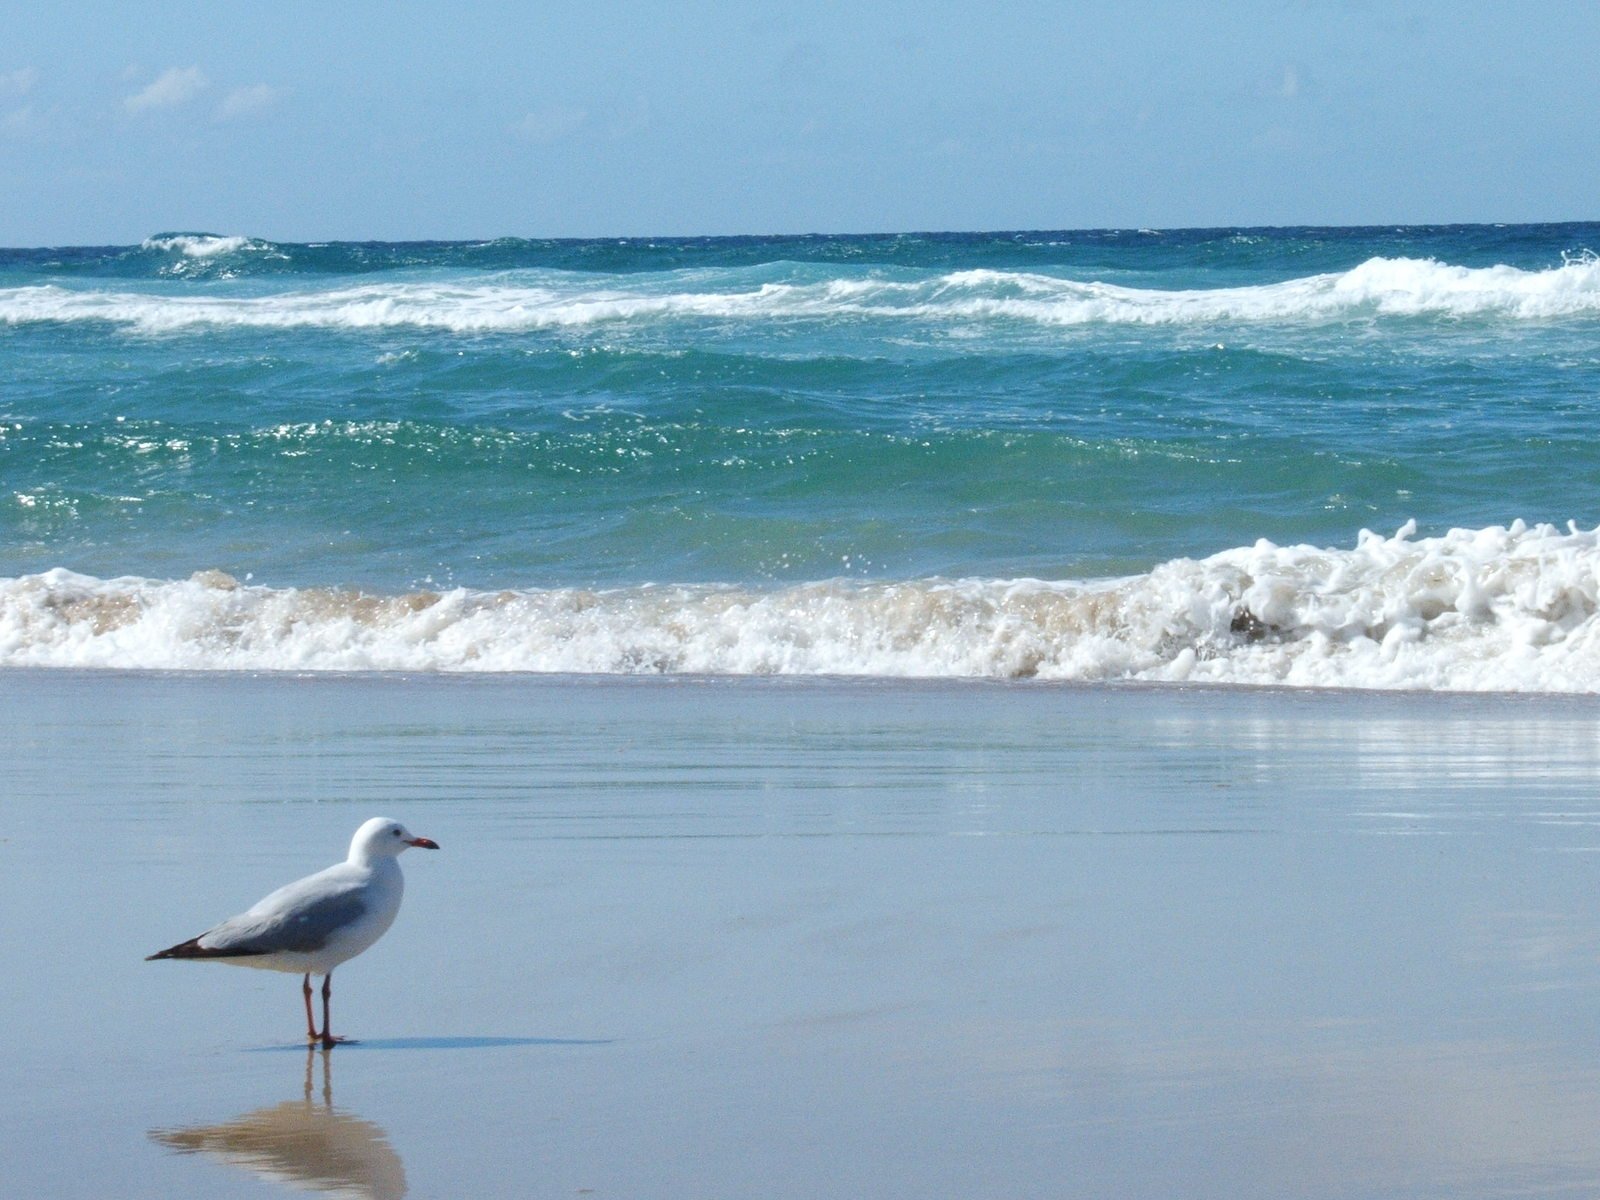 a seagull standing in the shallow water on a beach